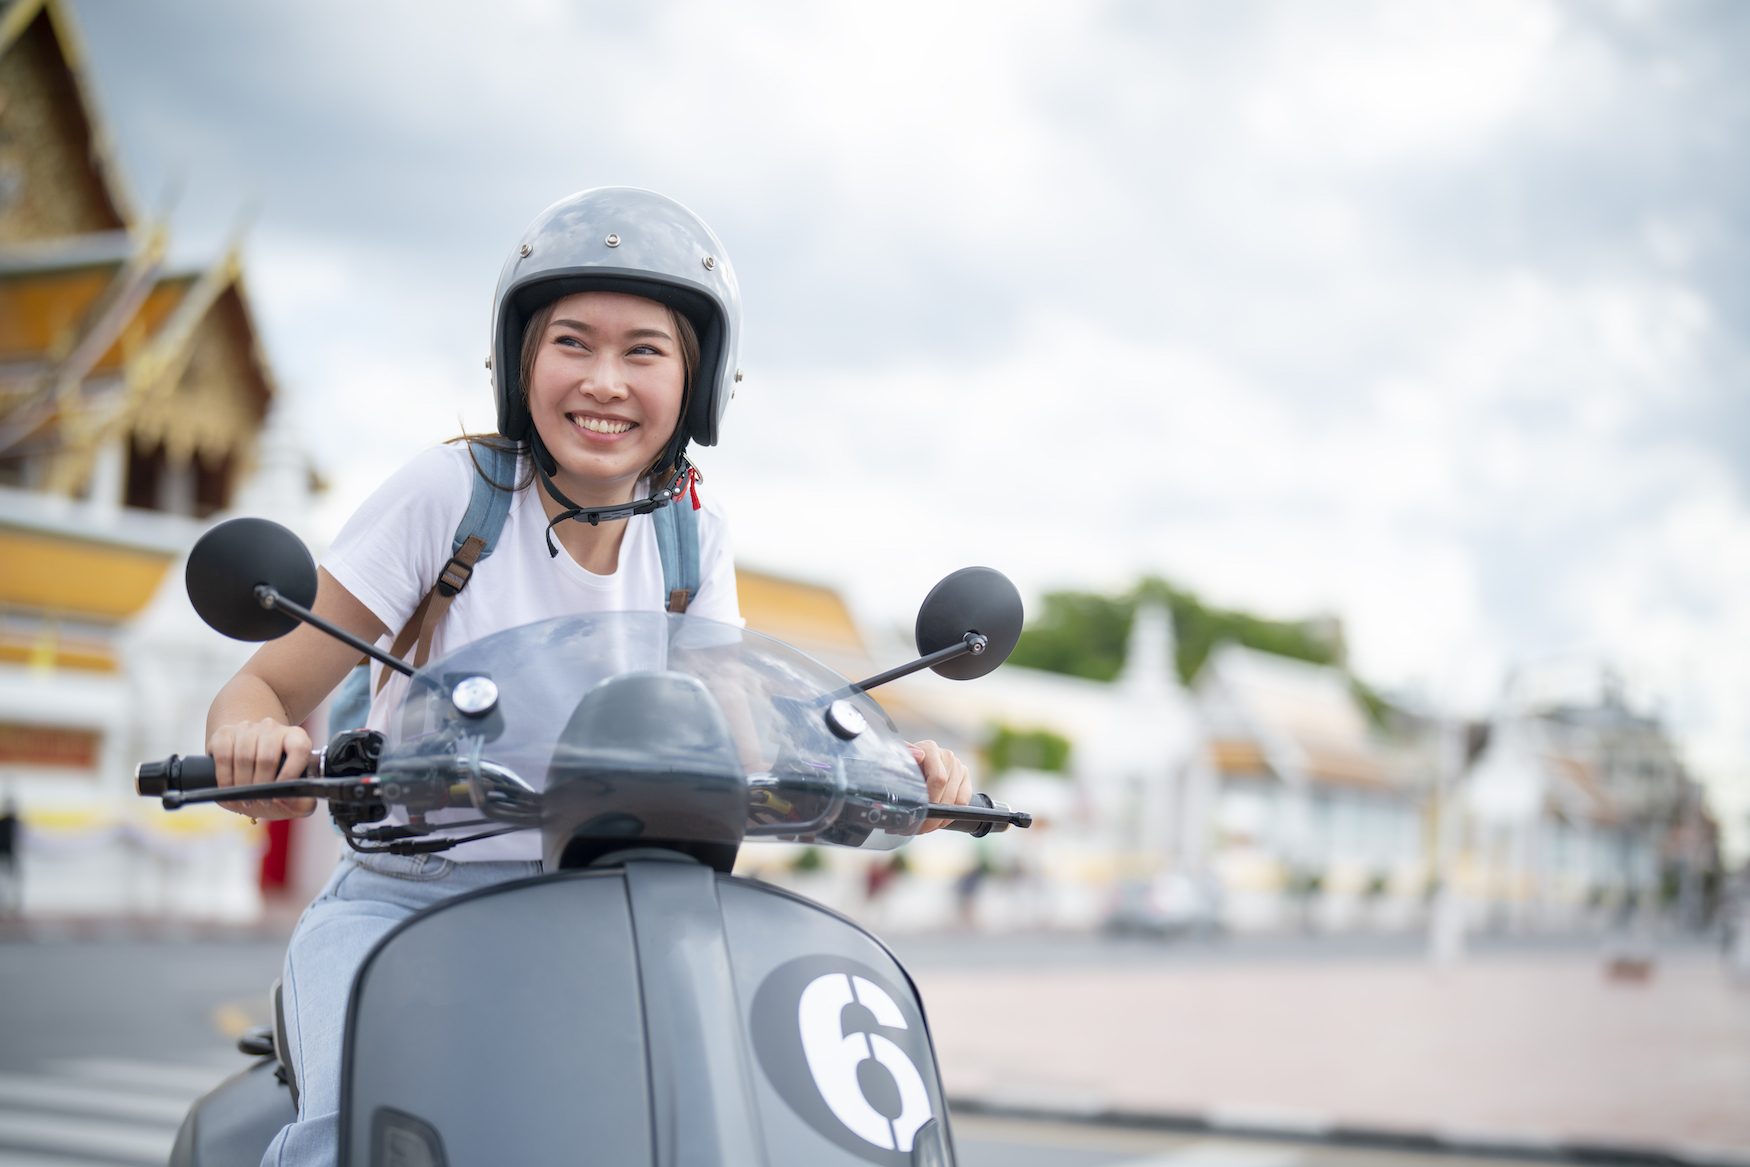 A woman riding a motor scooter